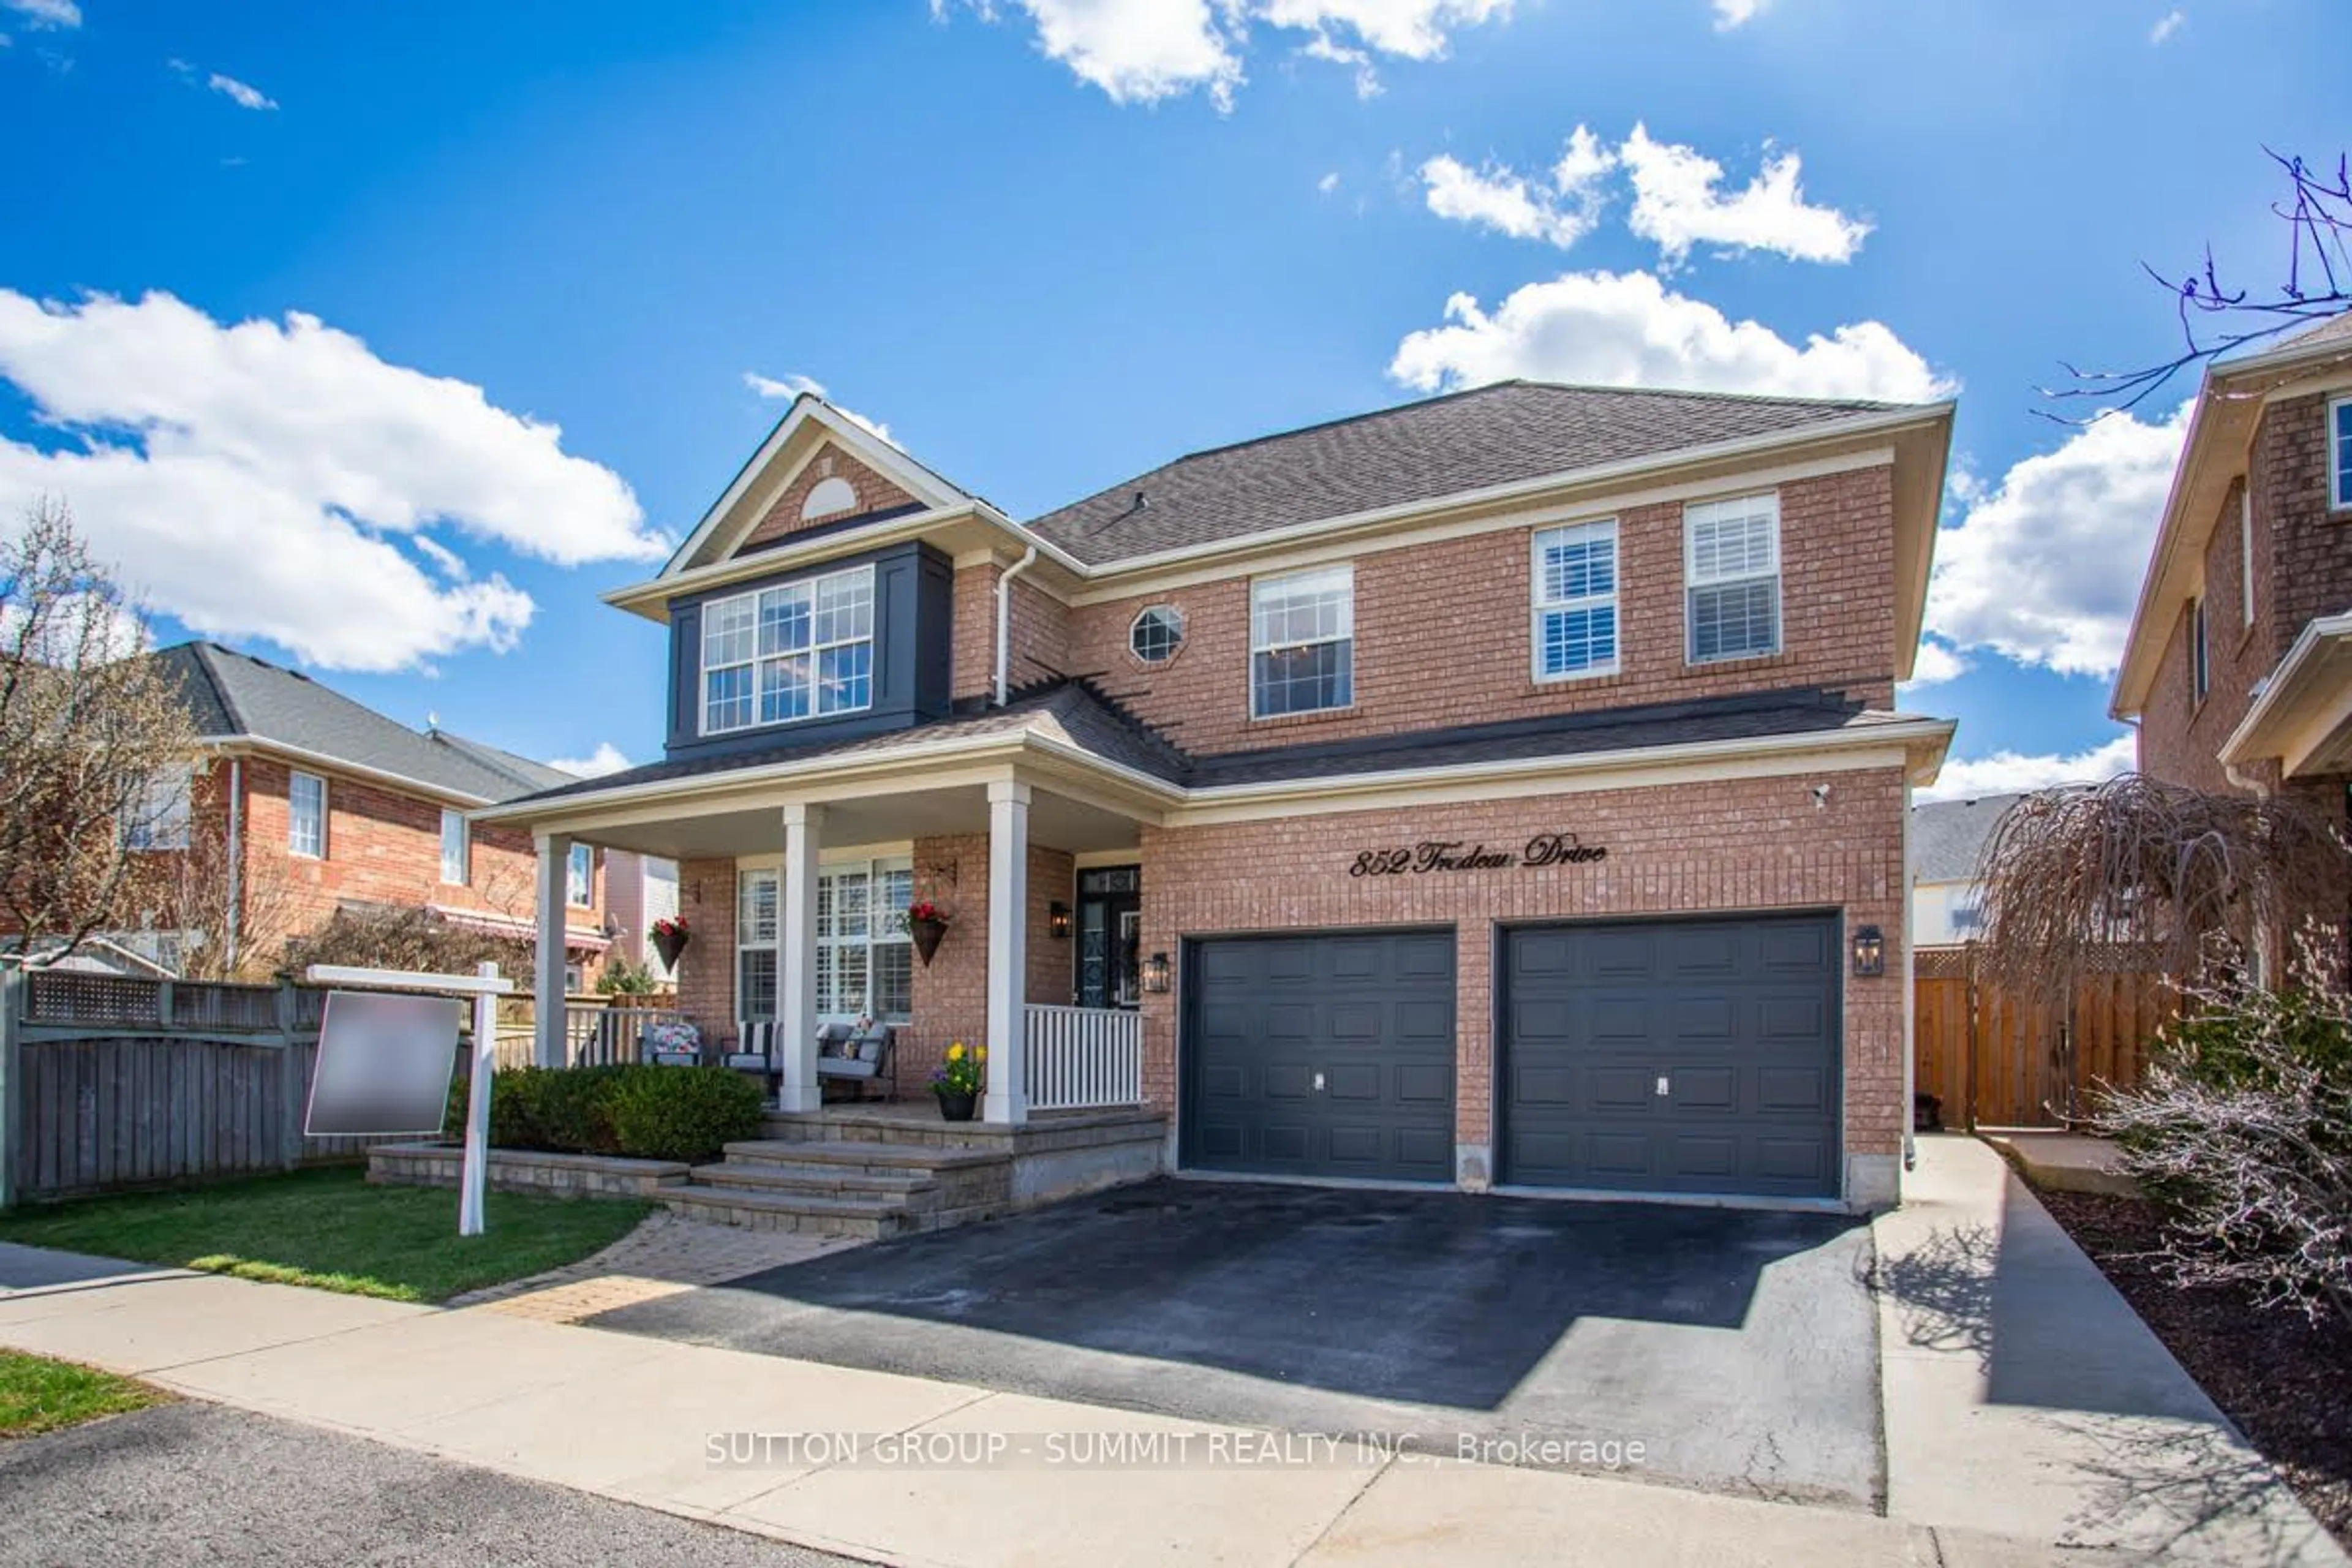 Home with brick exterior material for 852 Trudeau Dr, Milton Ontario L9T 5T7